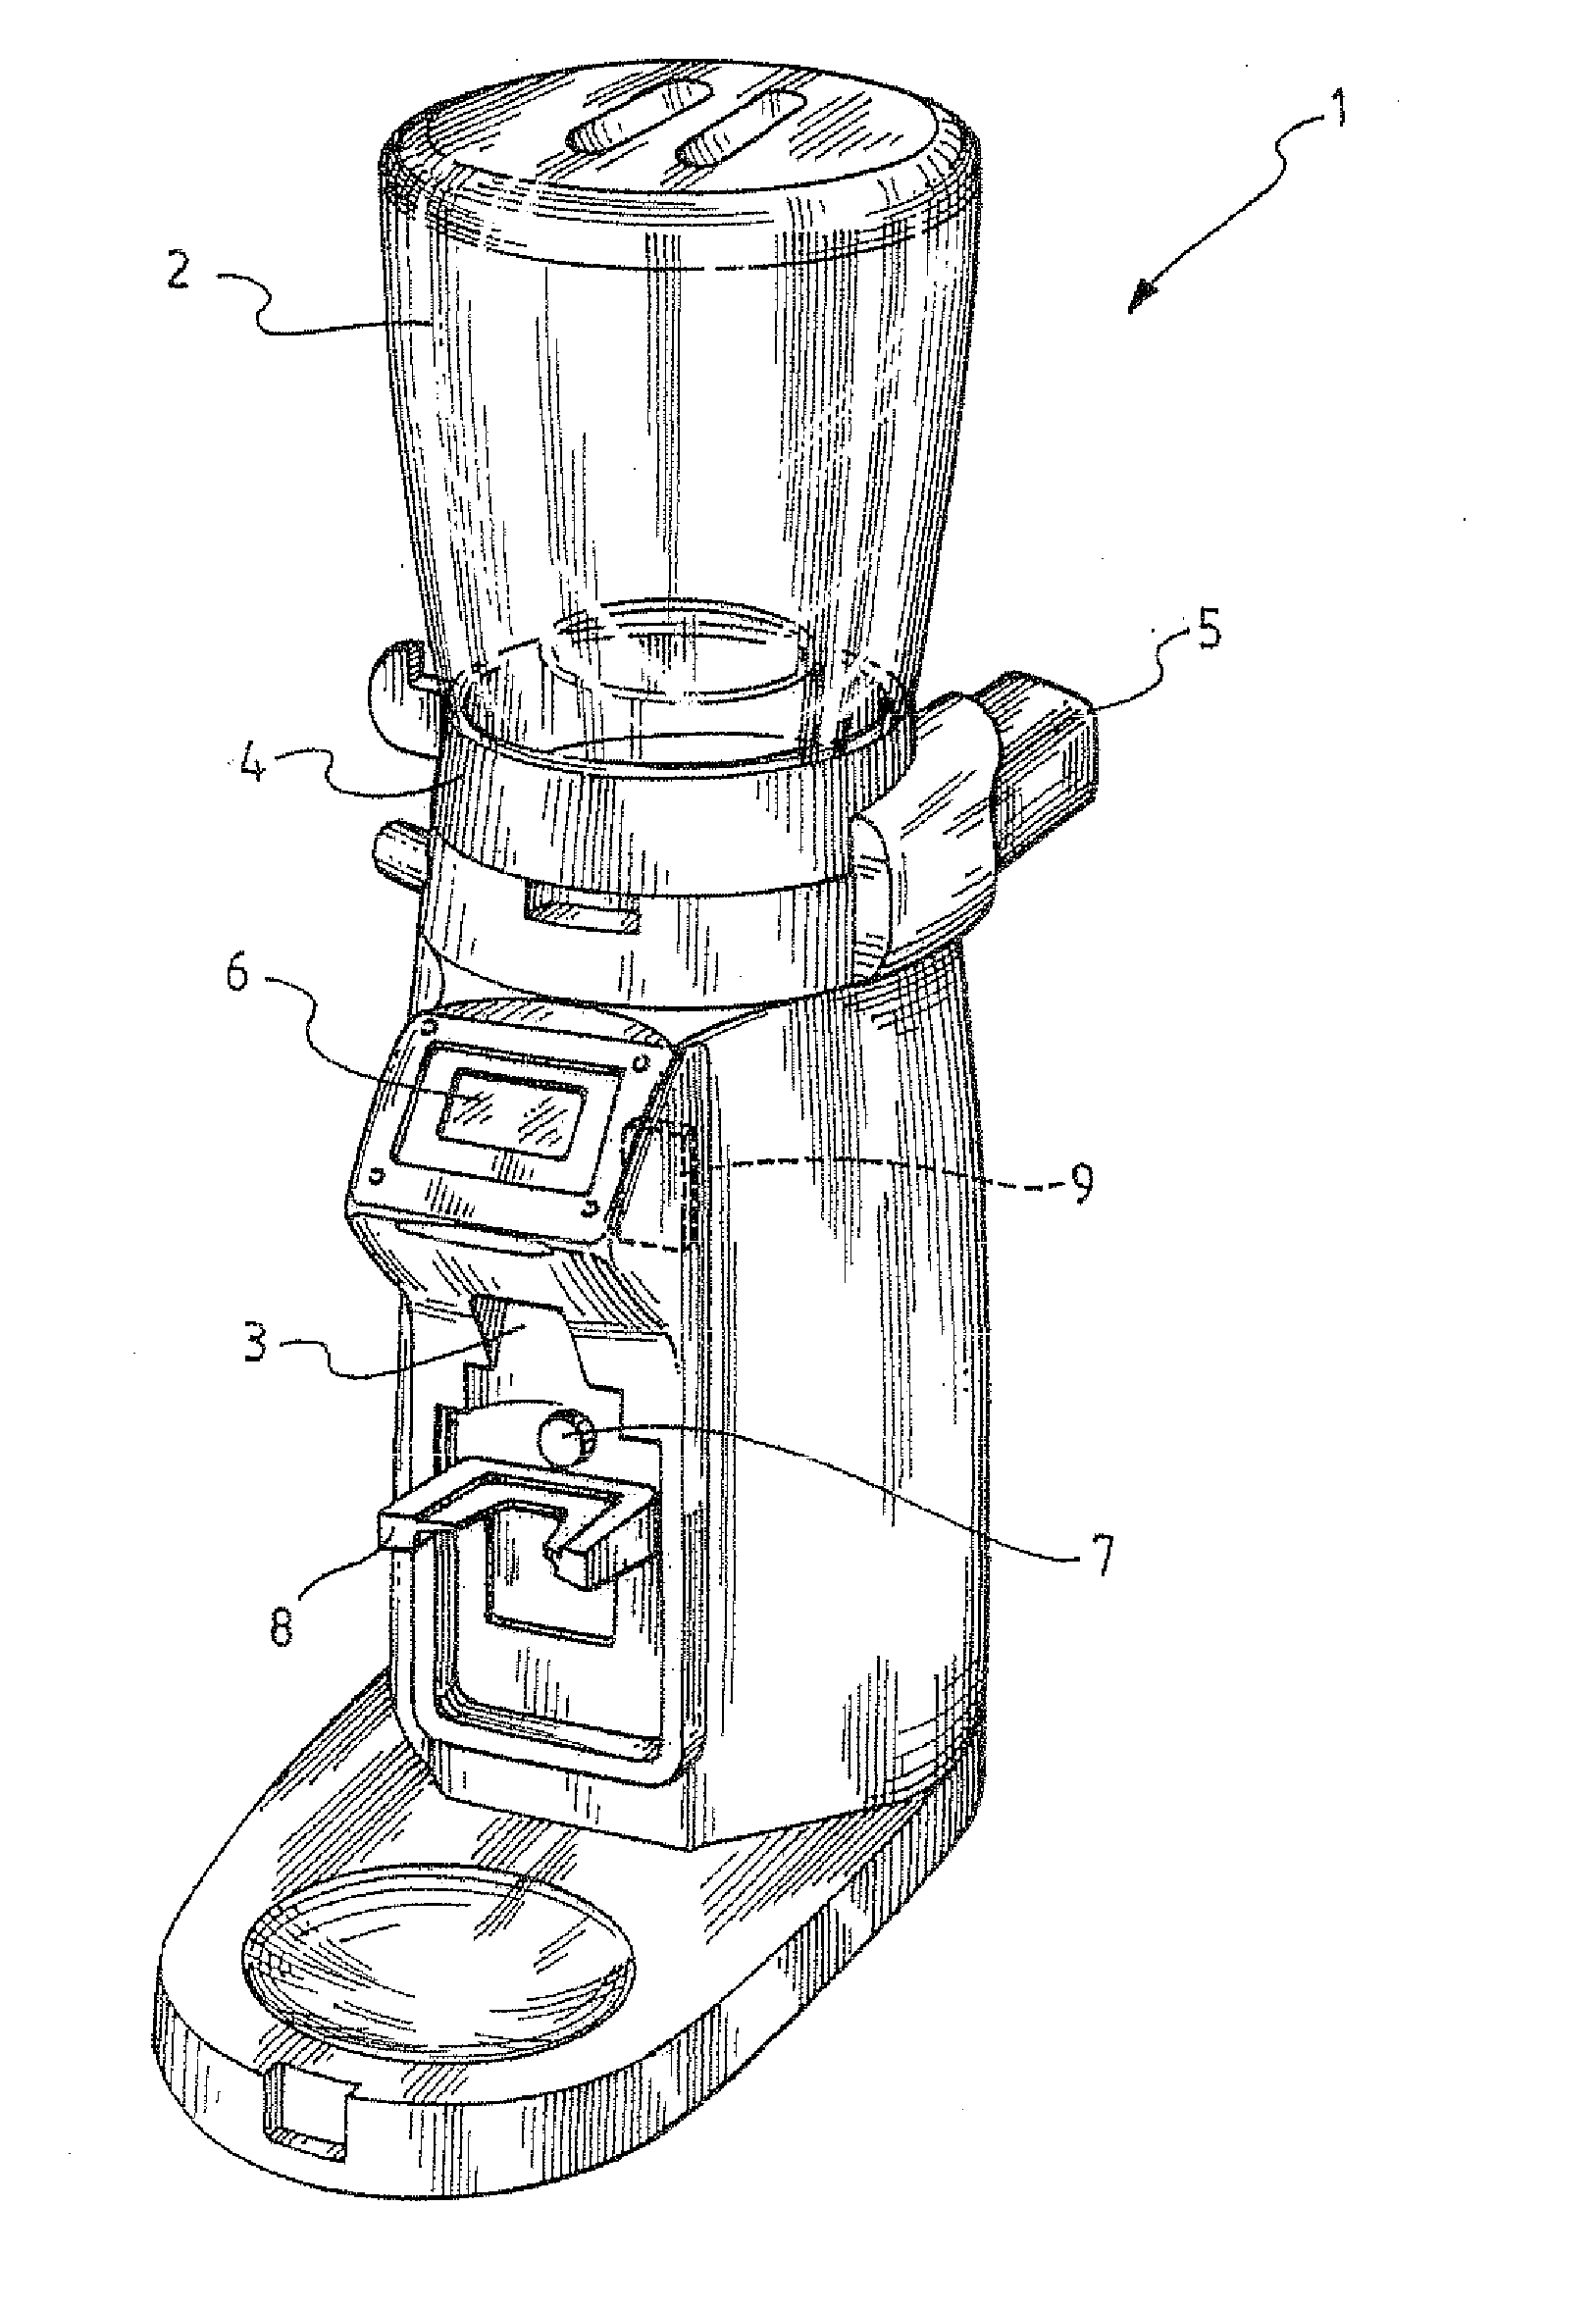 Apparatus and a method for refilling the filter-holders of an espresso coffee machine with selected doses of ground coffee to order